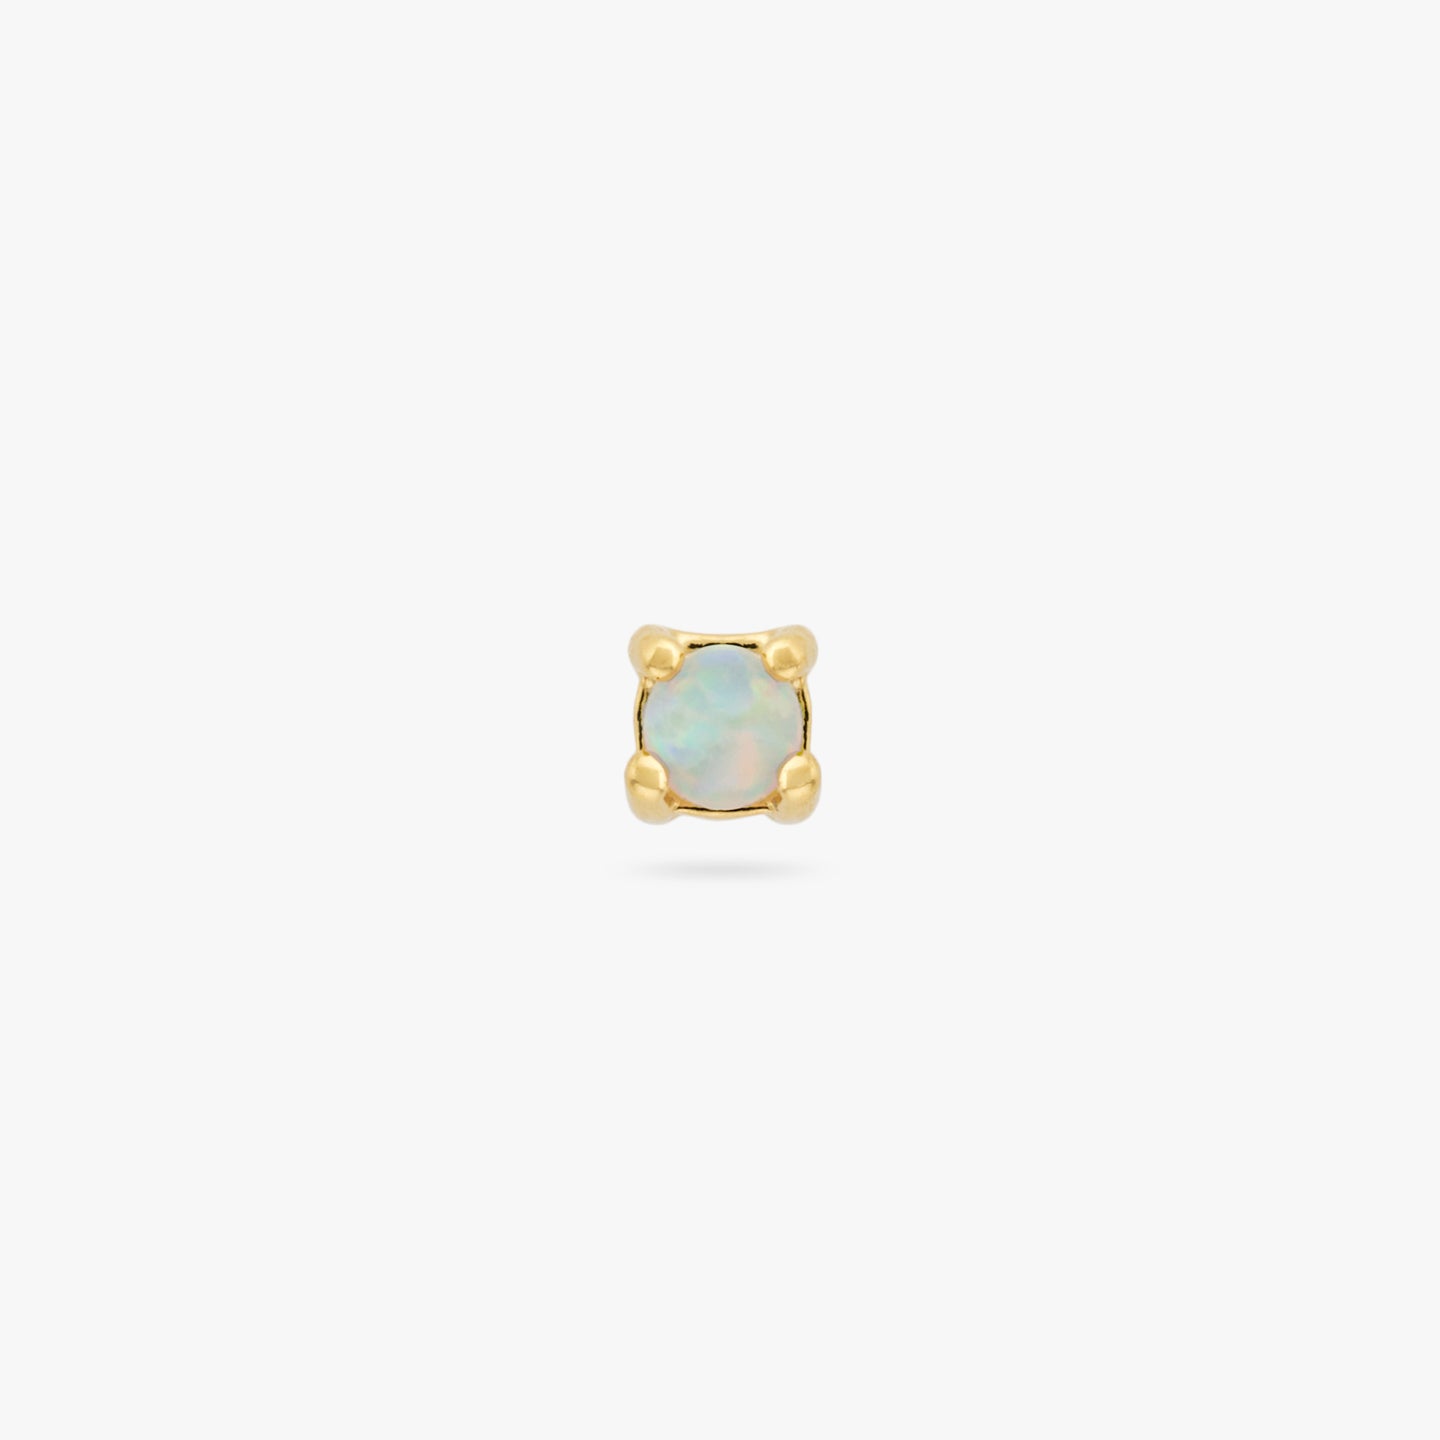 This is a small gold stud with an opal color:null|gold/opal